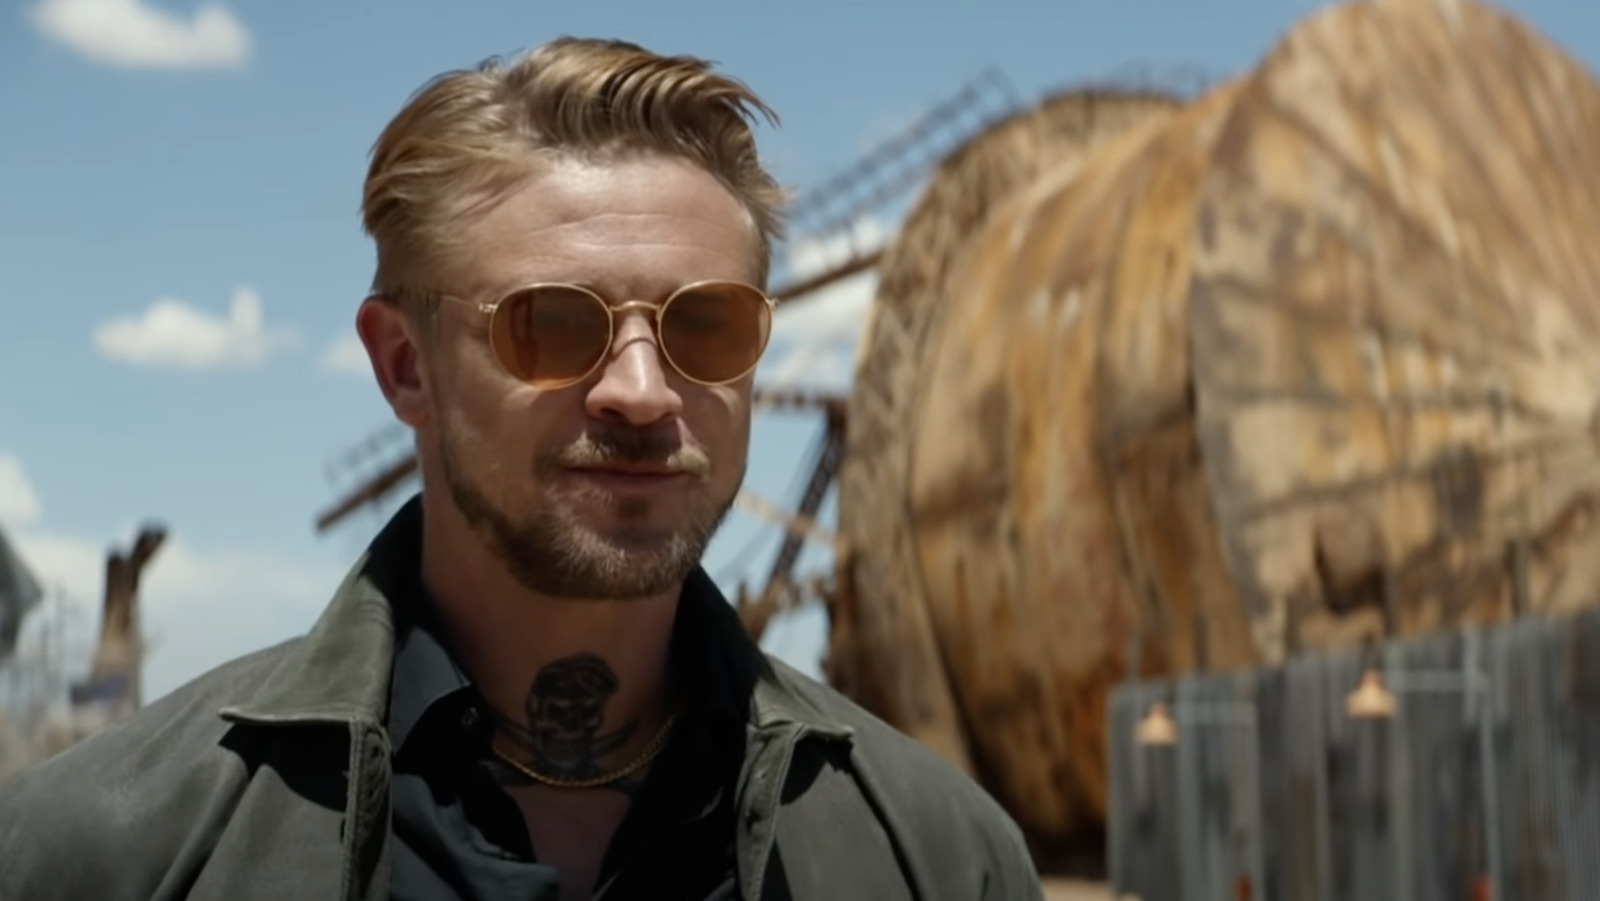 Justified City Primeval Star Boyd Holbrook Knows He Has Big